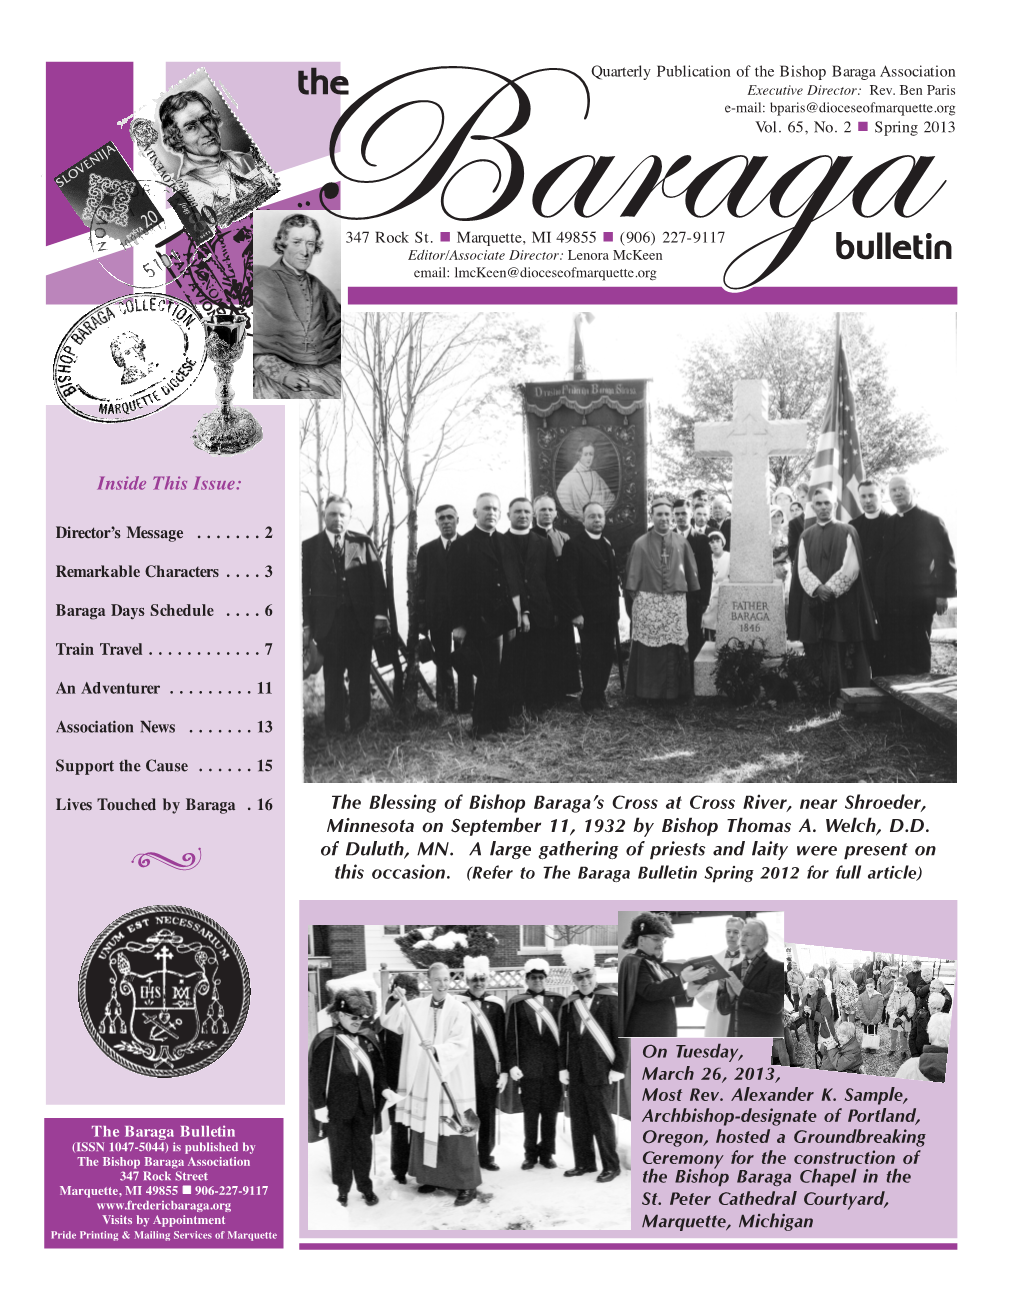 Inside This Issue: the Blessing of Bishop Baraga's Cross at Cross